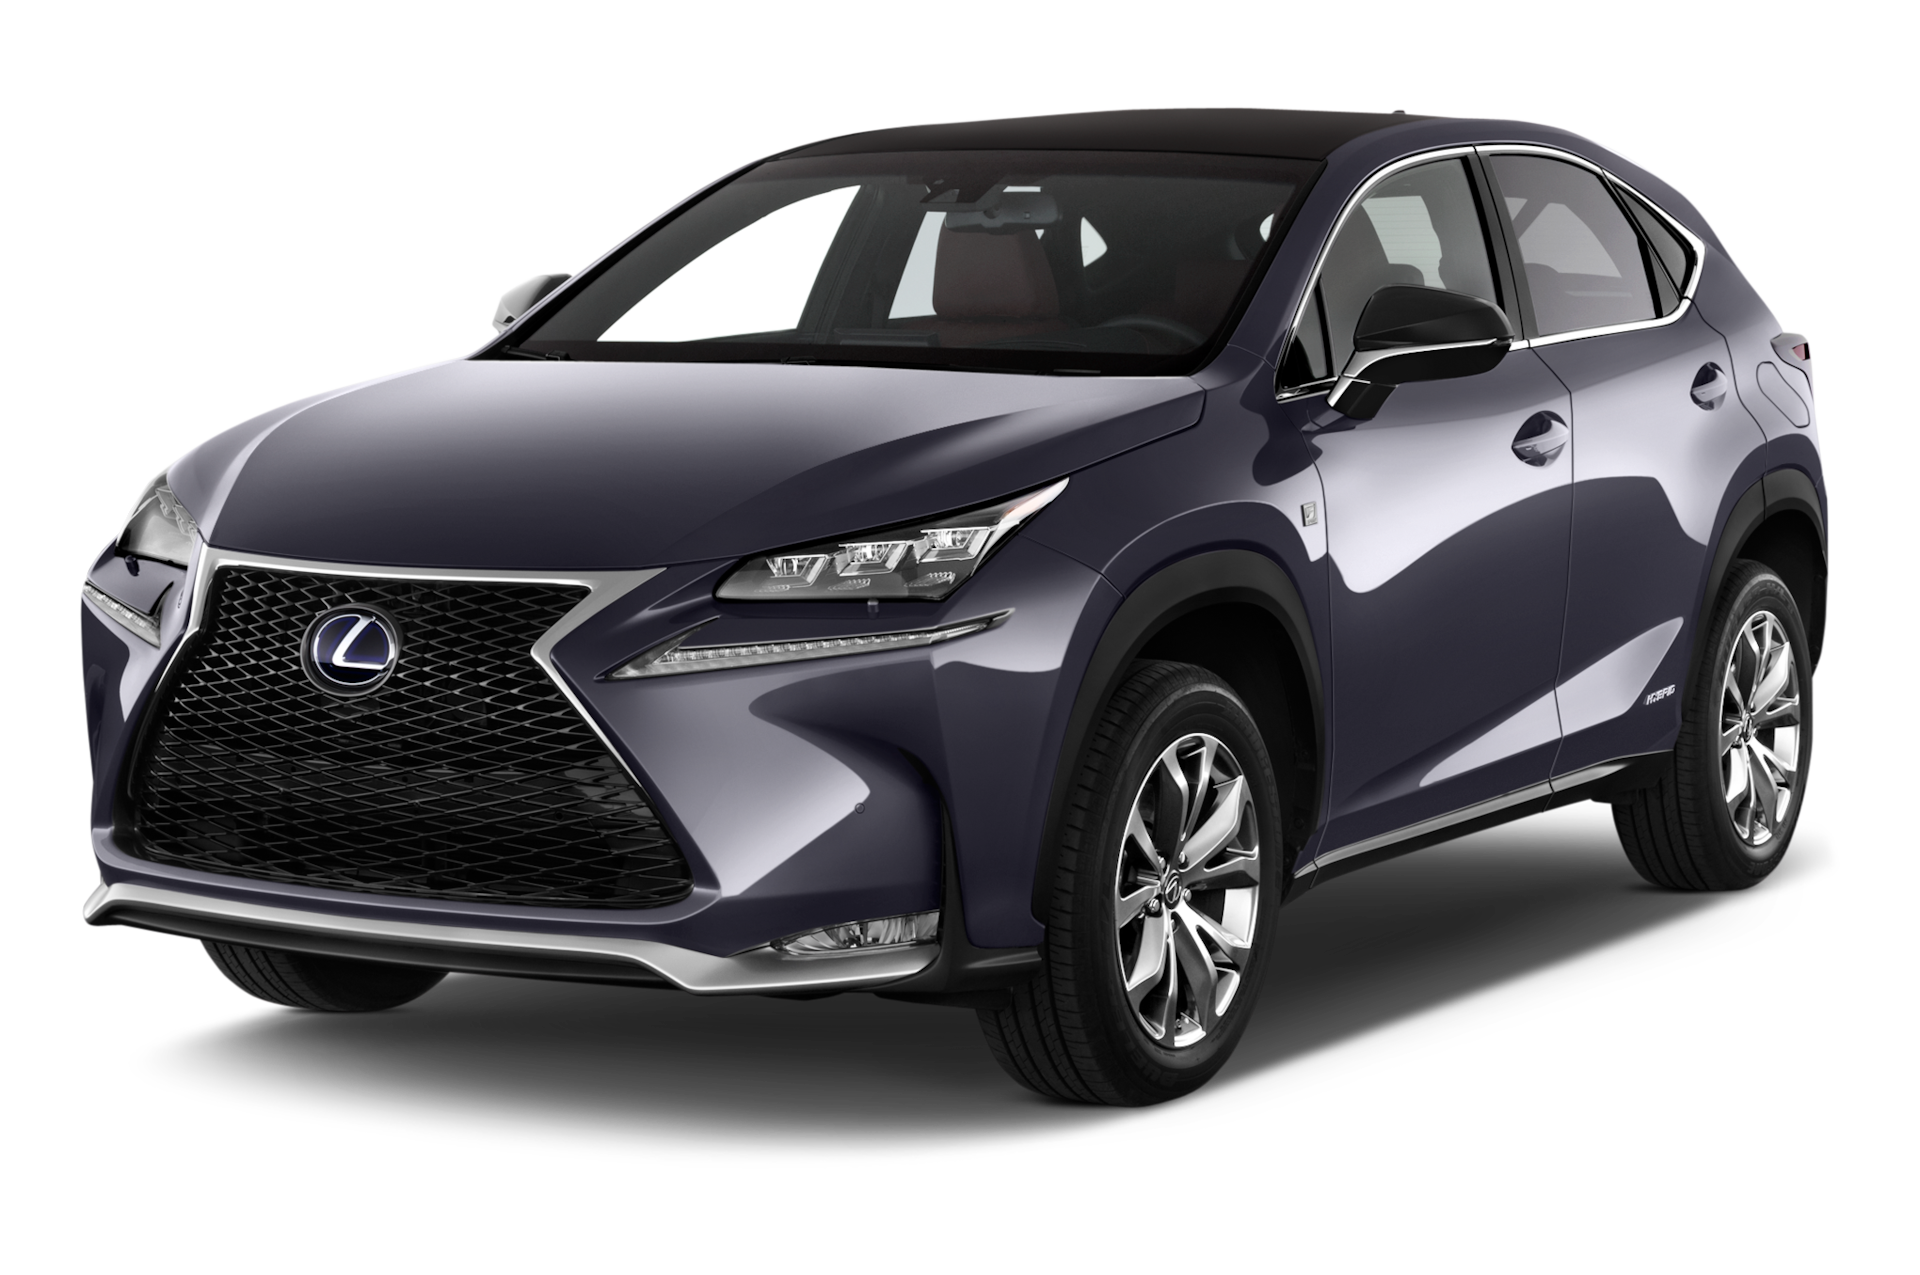 2015 Lexus NX300h Prices, Reviews, and Photos - MotorTrend